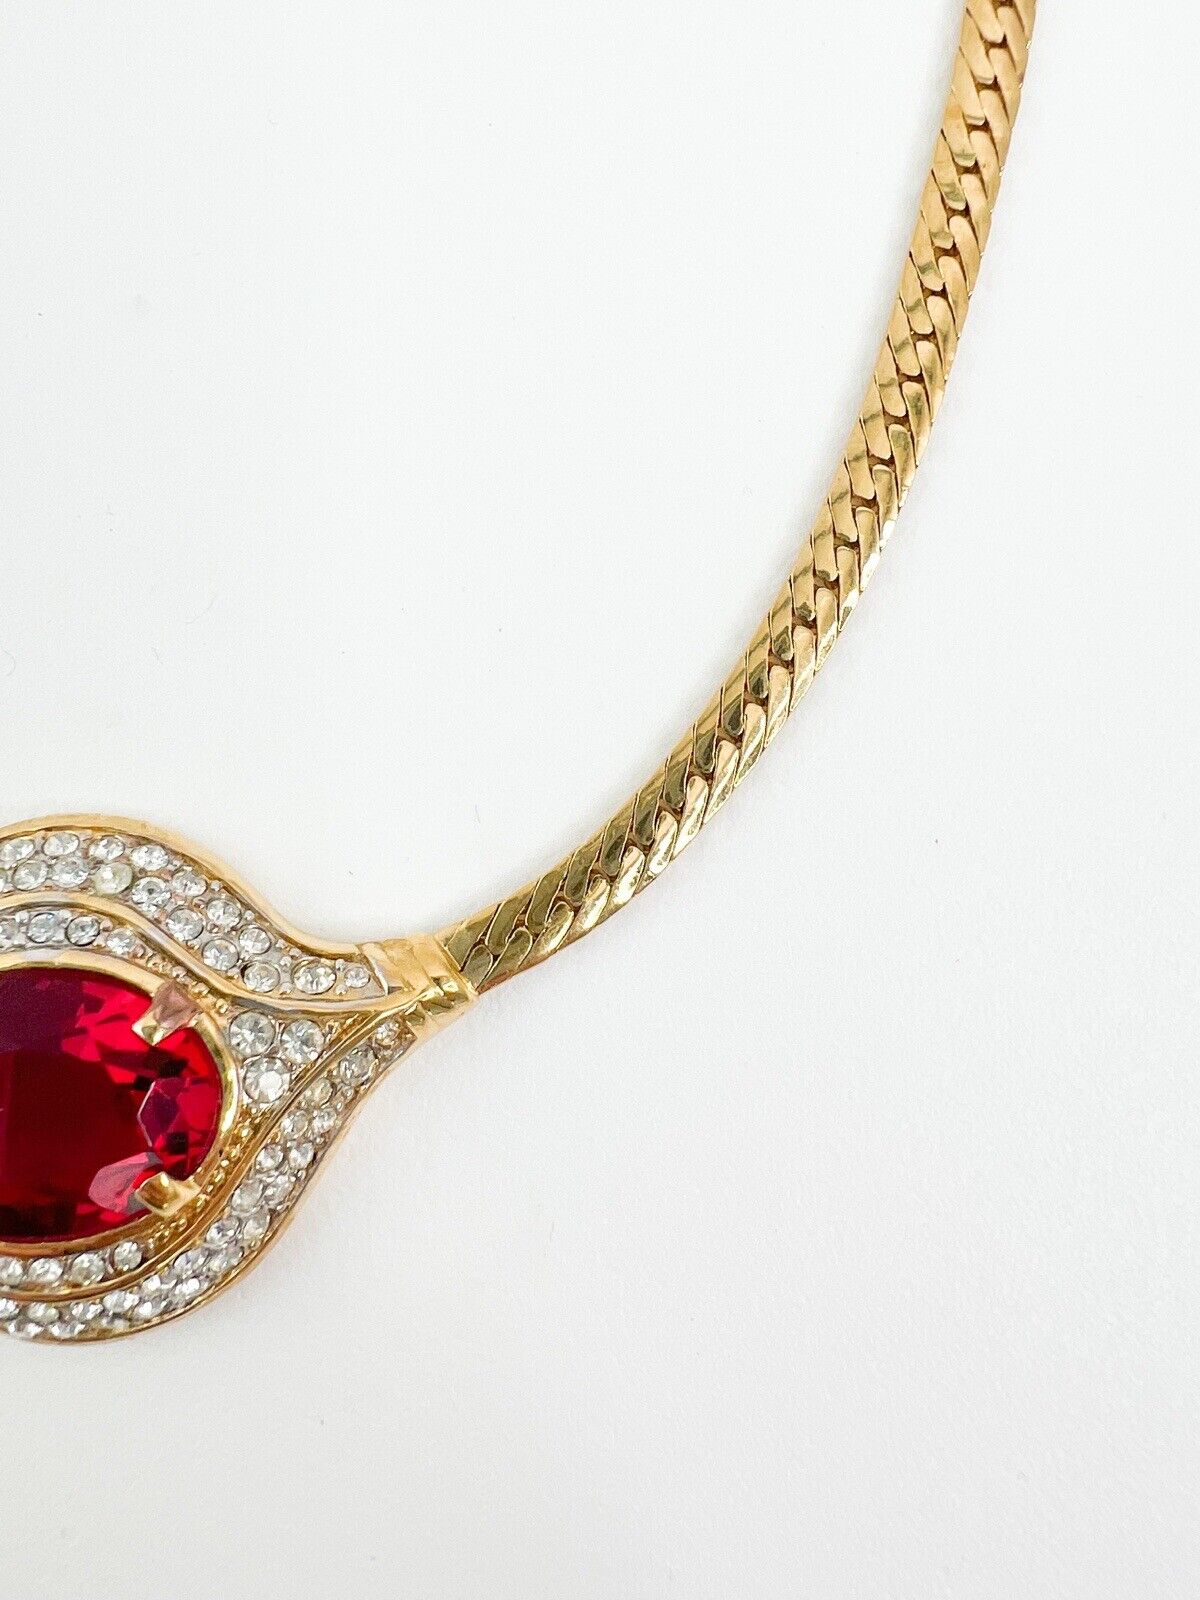 Vintage Nina Ricci Necklace, Gold Tone Necklace, Choker Necklace, Ruby necklace, Vintage Rhinestone, Jewelry for Women, Personalized Gifts